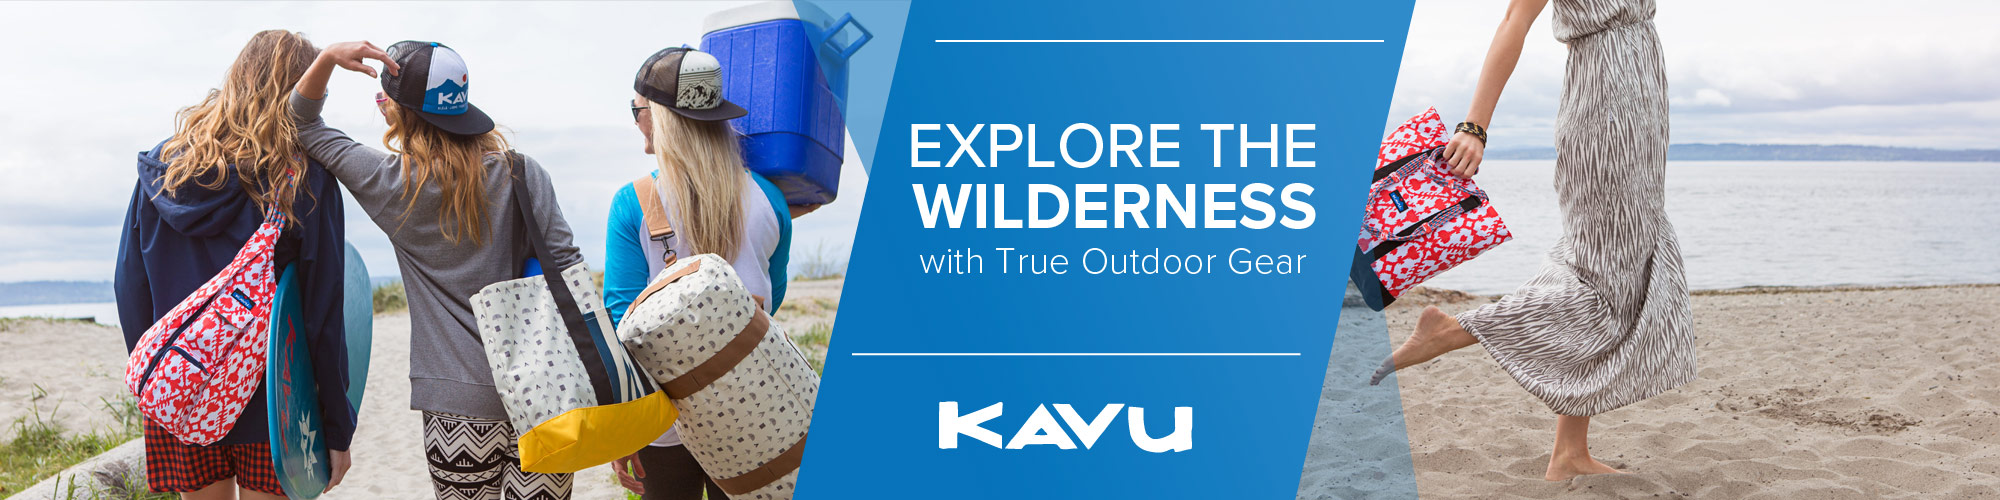 Shop Kavu bags and clothing